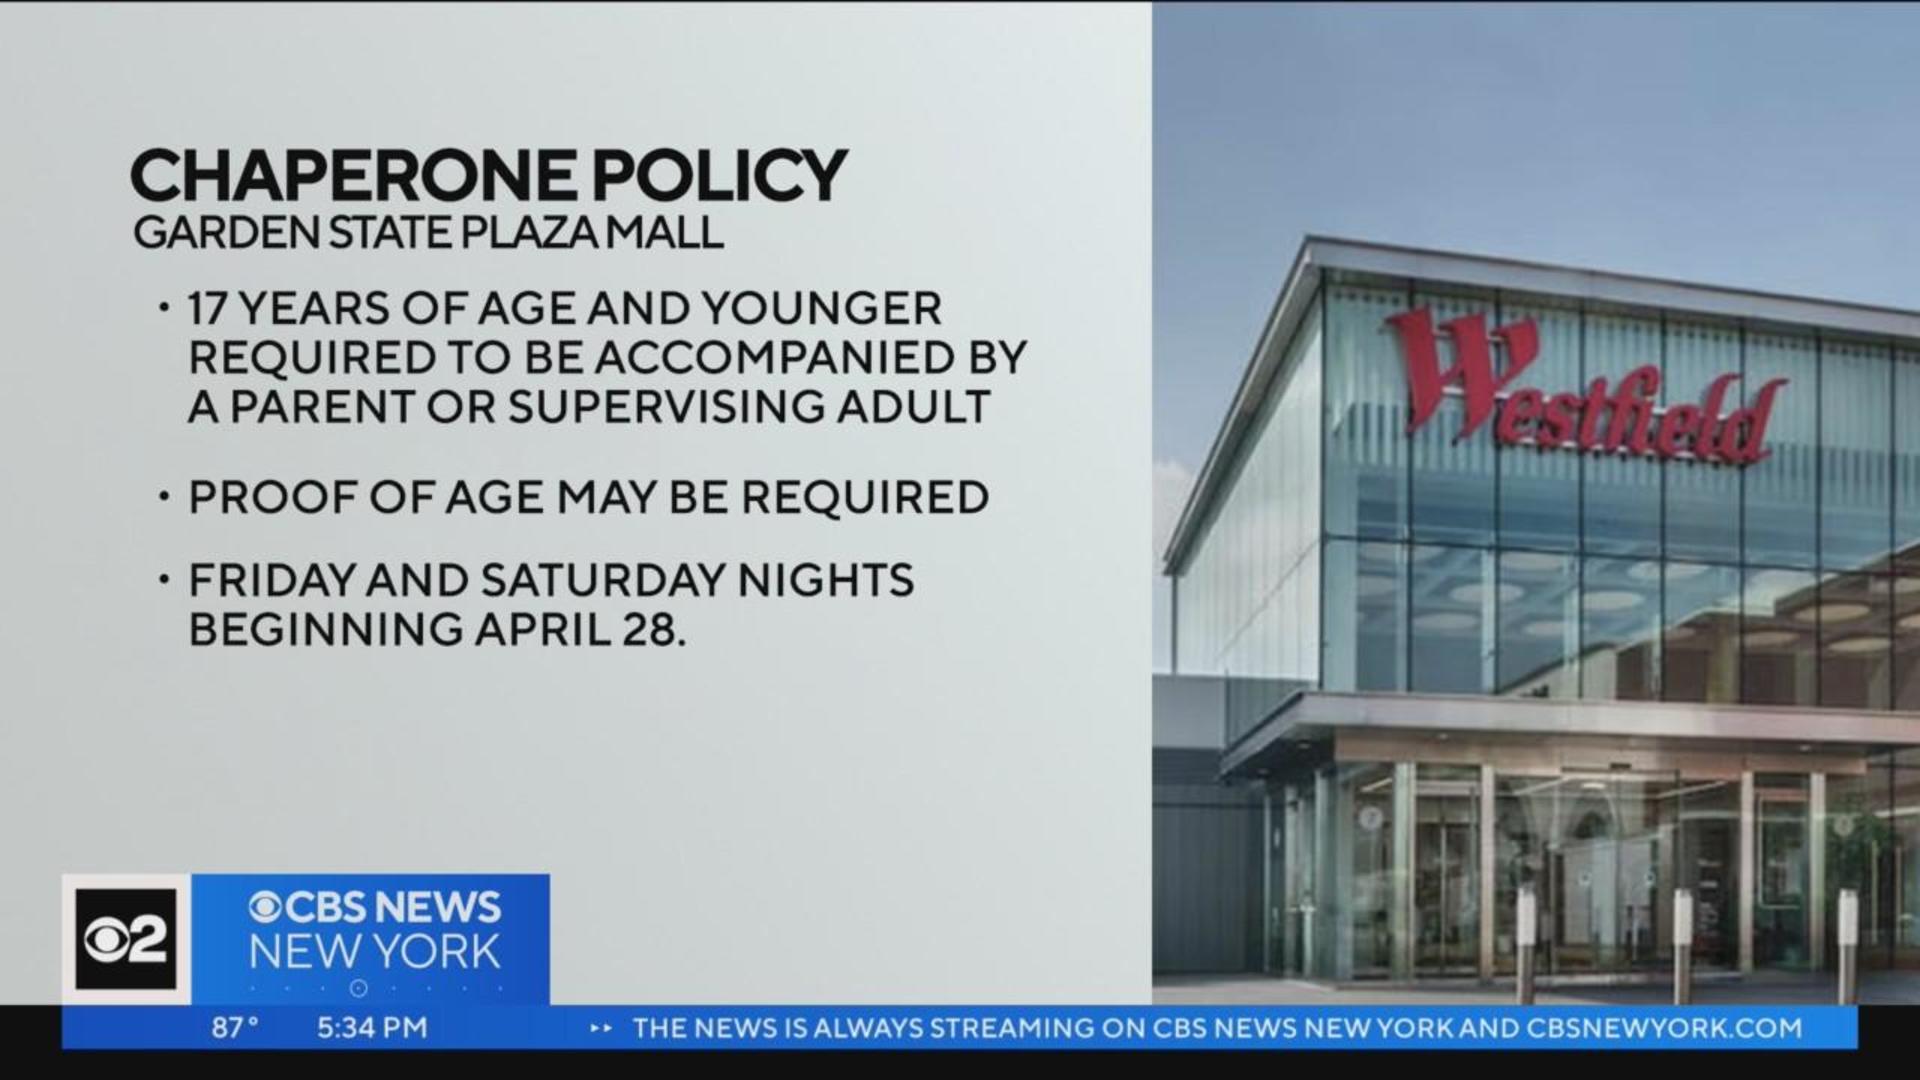 Garden State Plaza Mall implements new chaperone policy - CBS New York